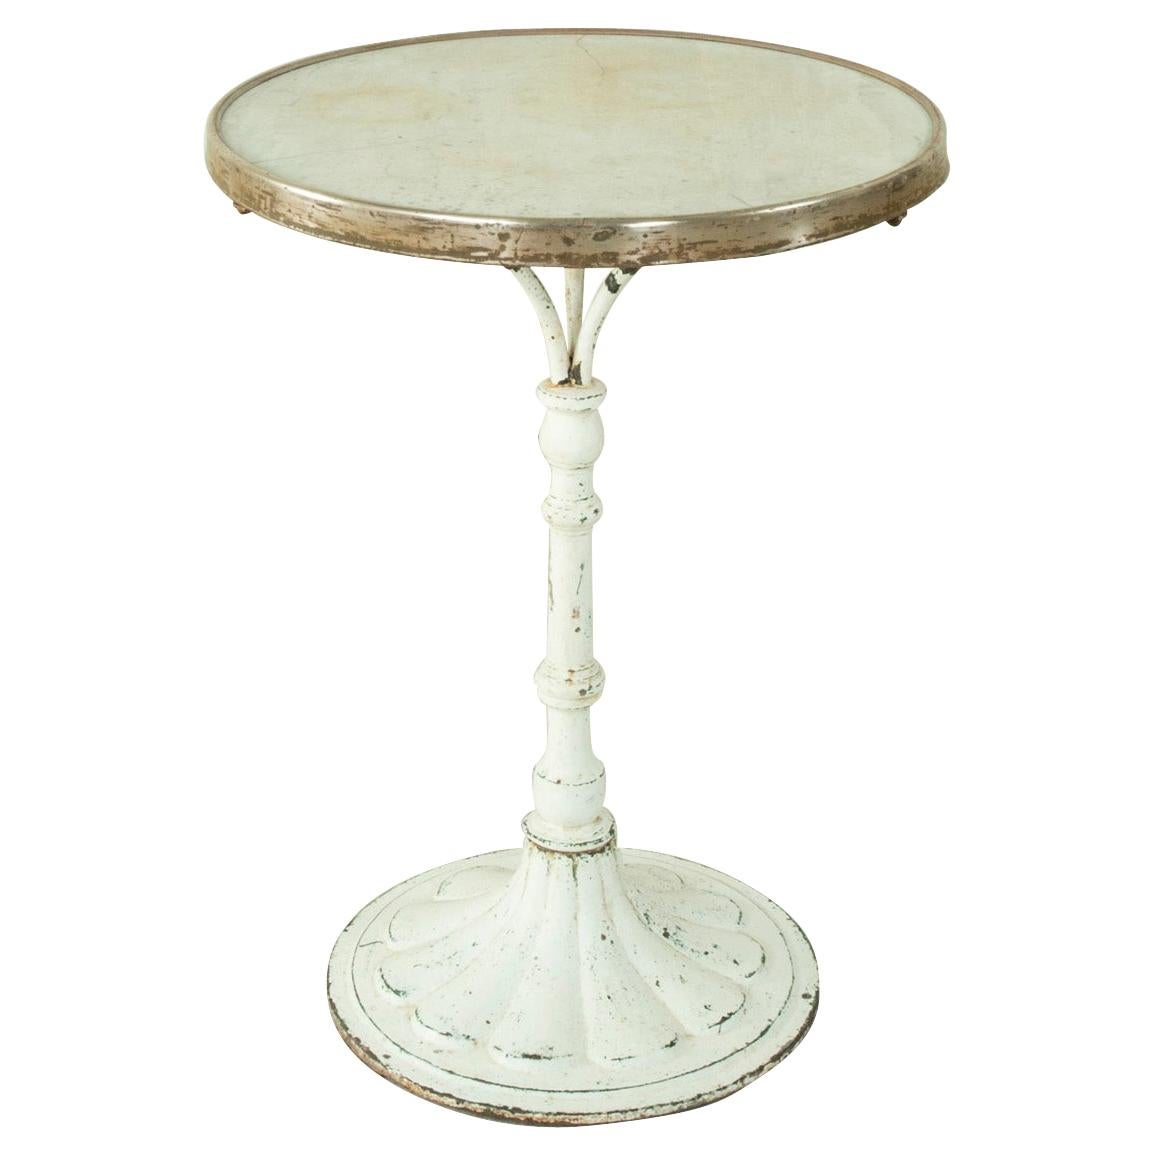 French Round Iron Bistro Table or Side Table with Marble Top, Brass Trim C. 1900